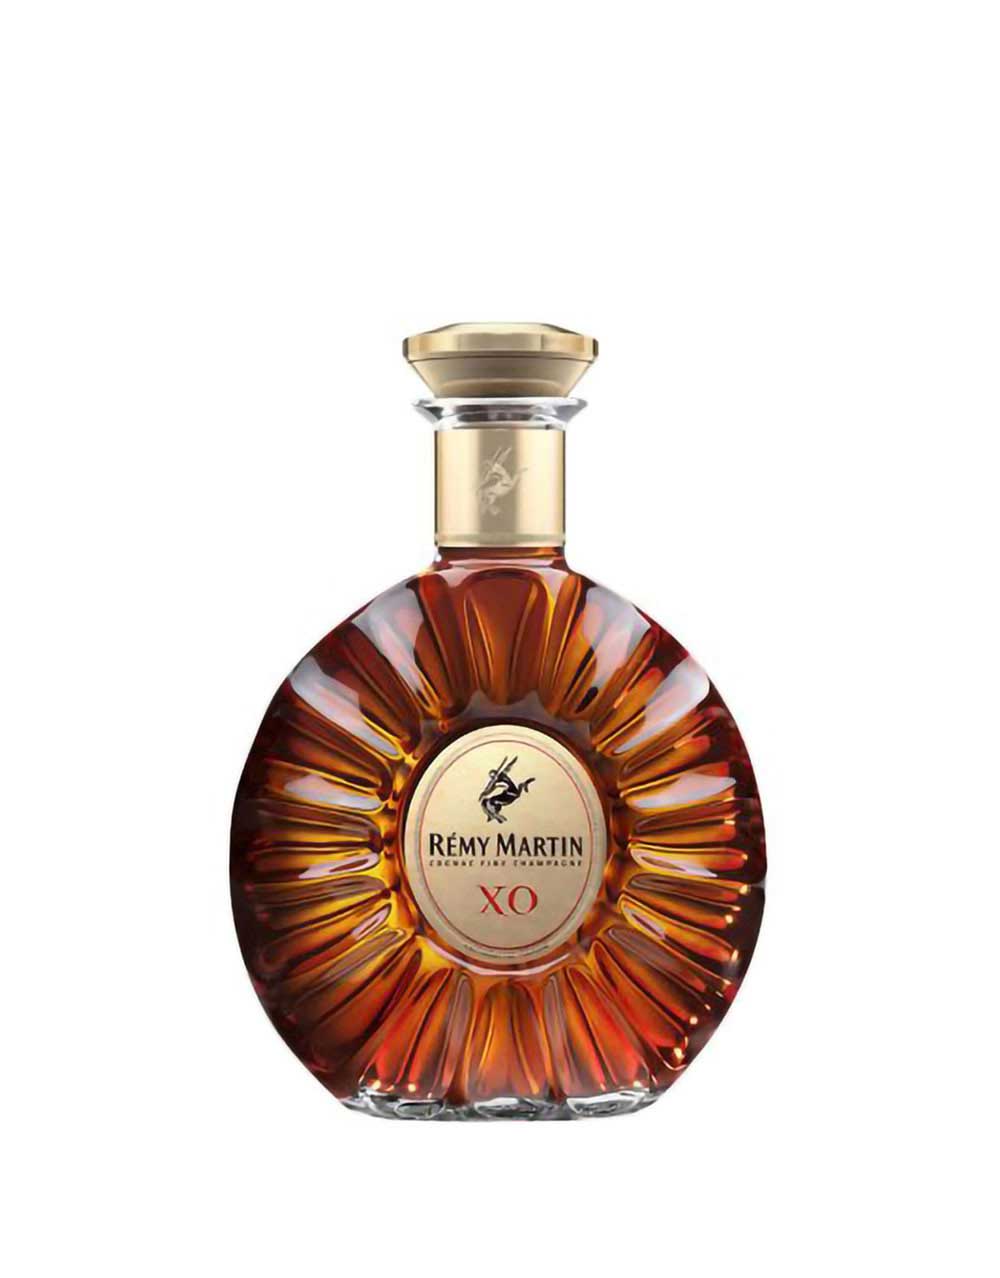 Hennessy V.S.O.P Privilge Limited Edition By Guanyu Zhang Cognac